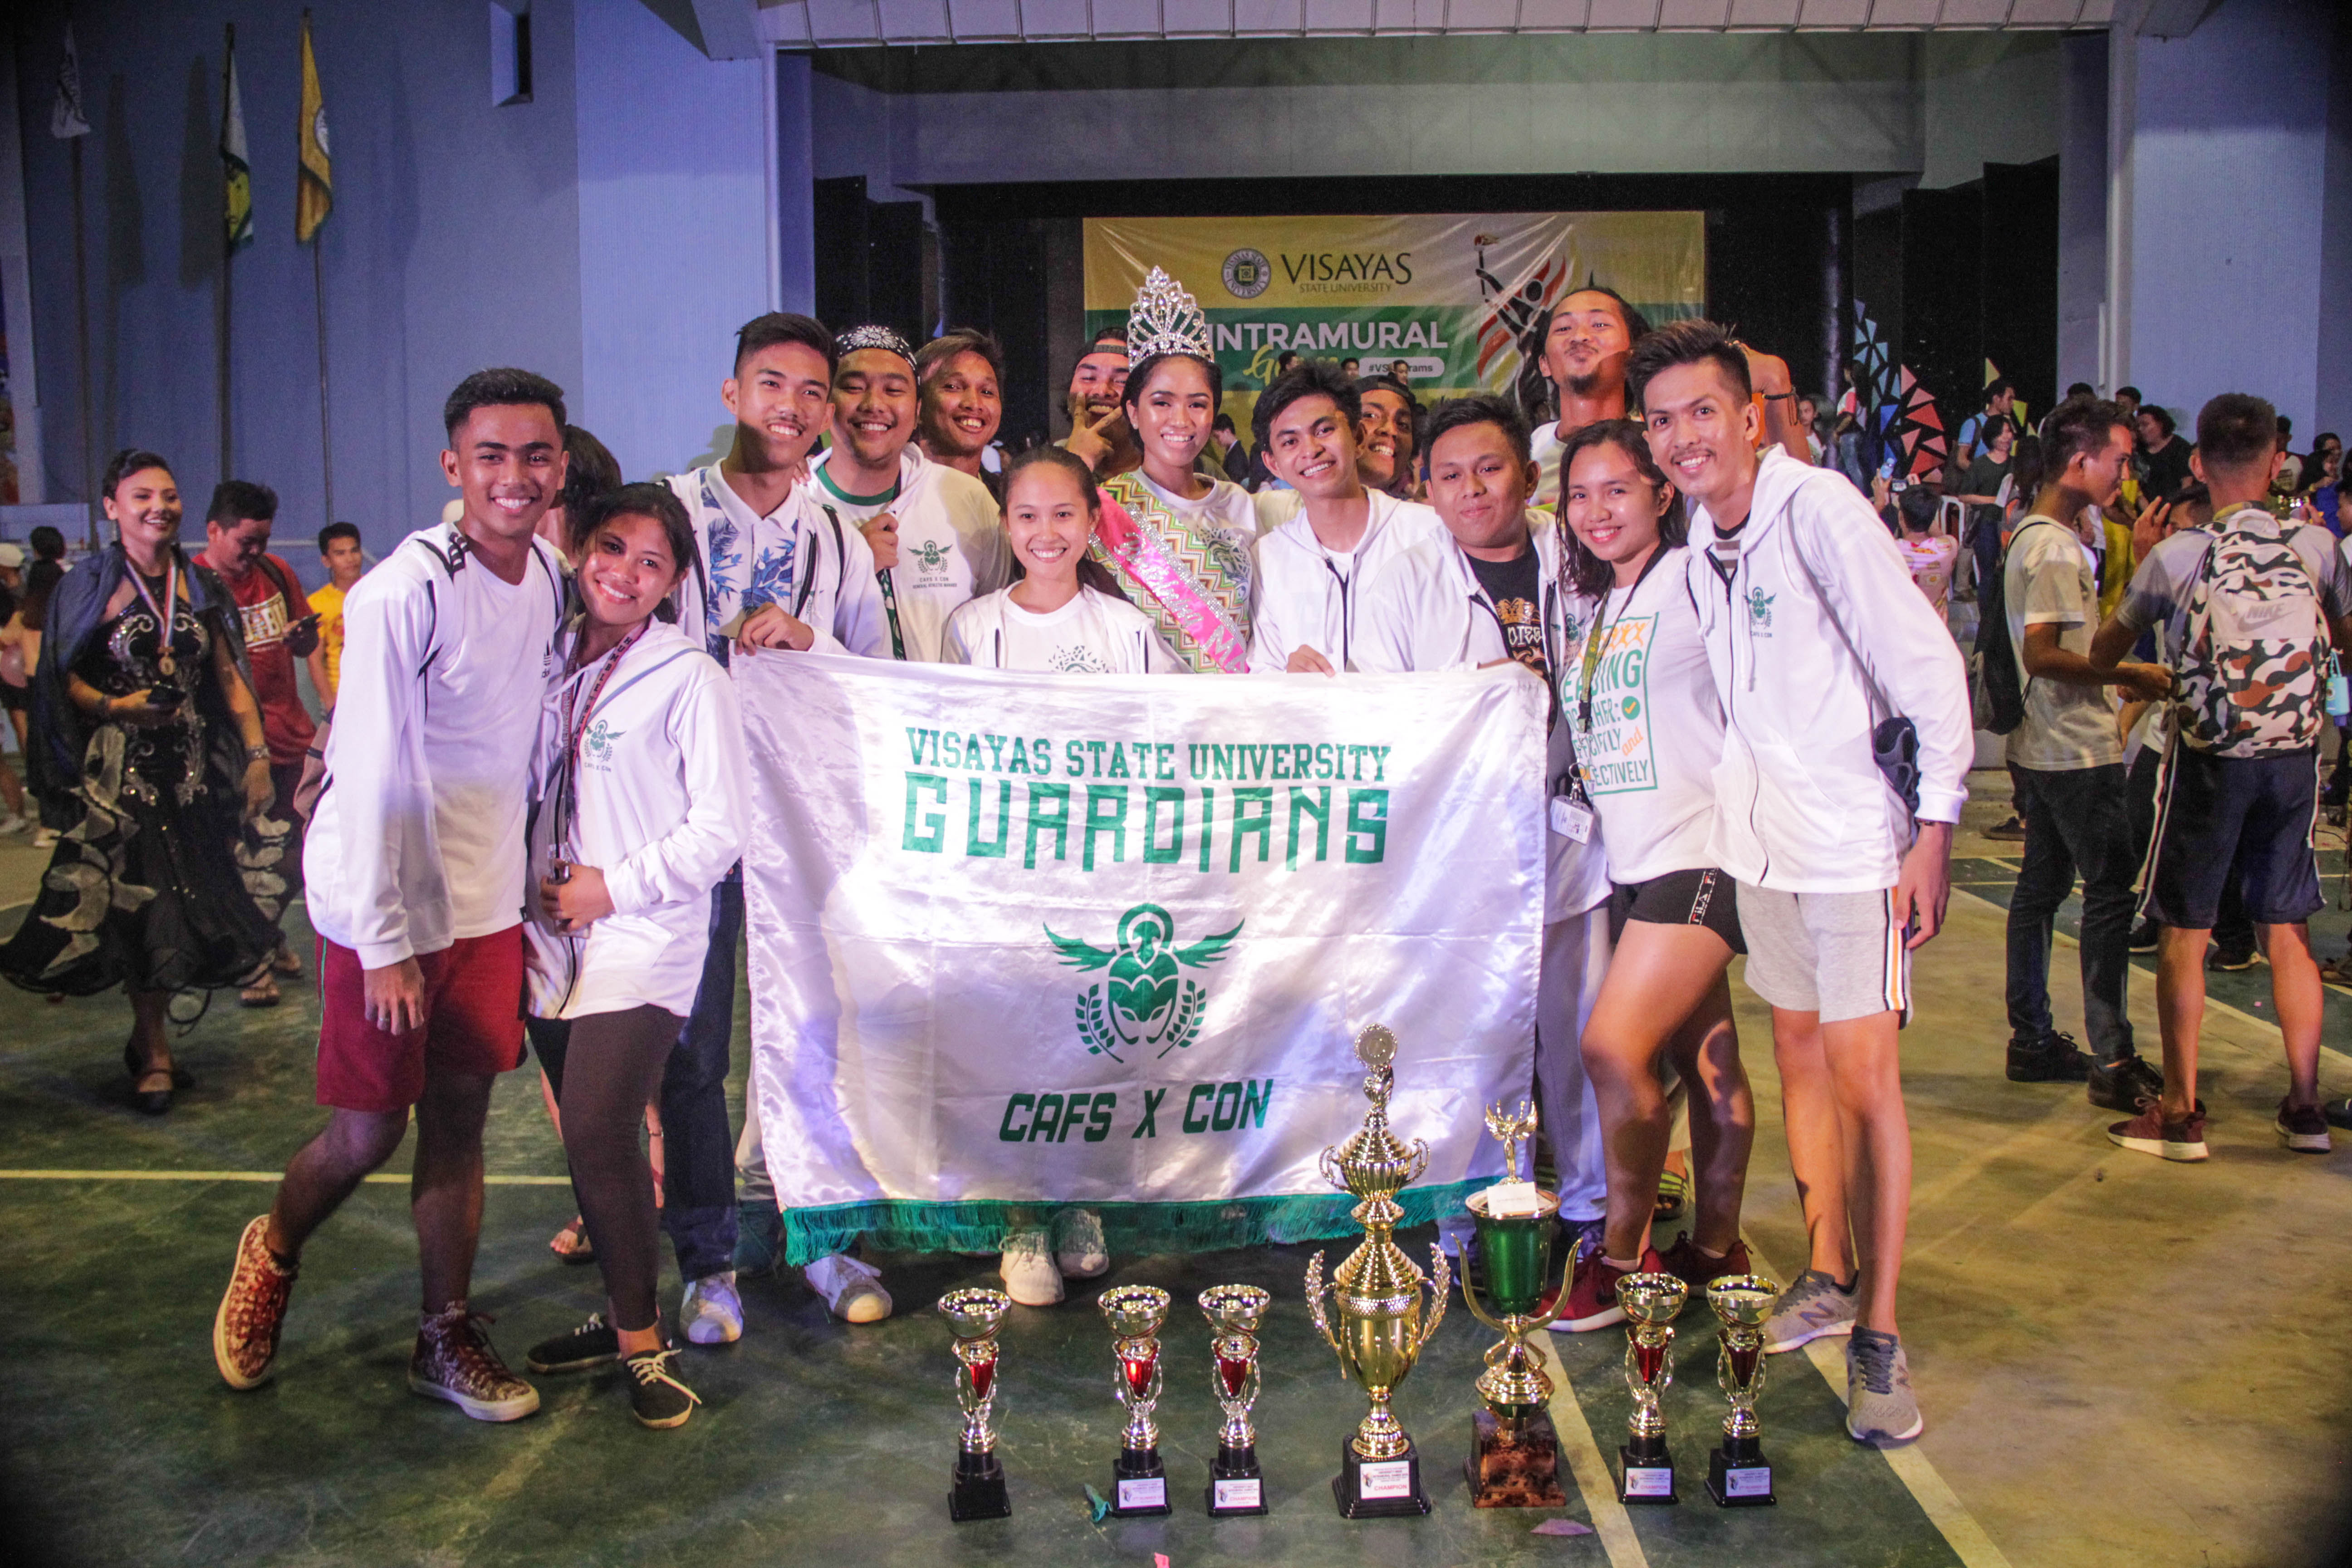 TOP. From their third place standing two years ago, the Guardians rose to the top as they seized the Overall Champion title of the 2019 system-wide #VSUIntrams. Photo by JP Corton